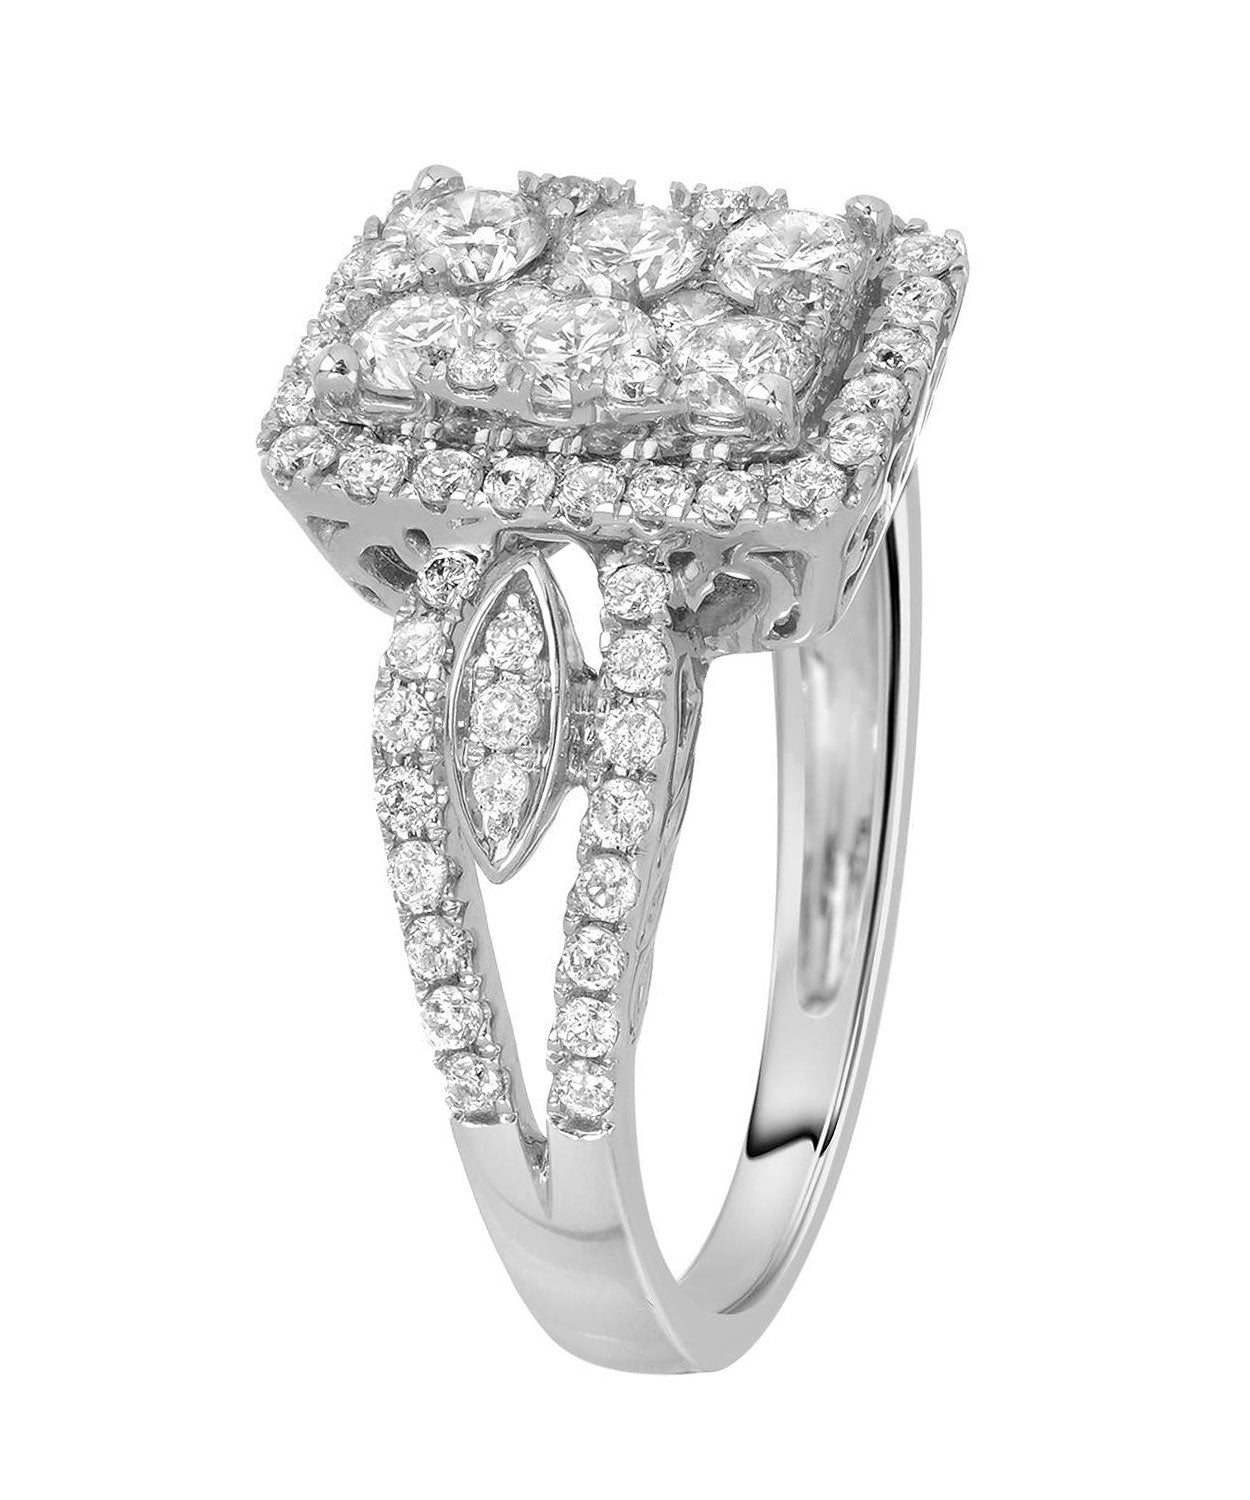 Signature Collection 1.03 ctw Diamond 14k White Gold Cluster Engagement Ring View 2